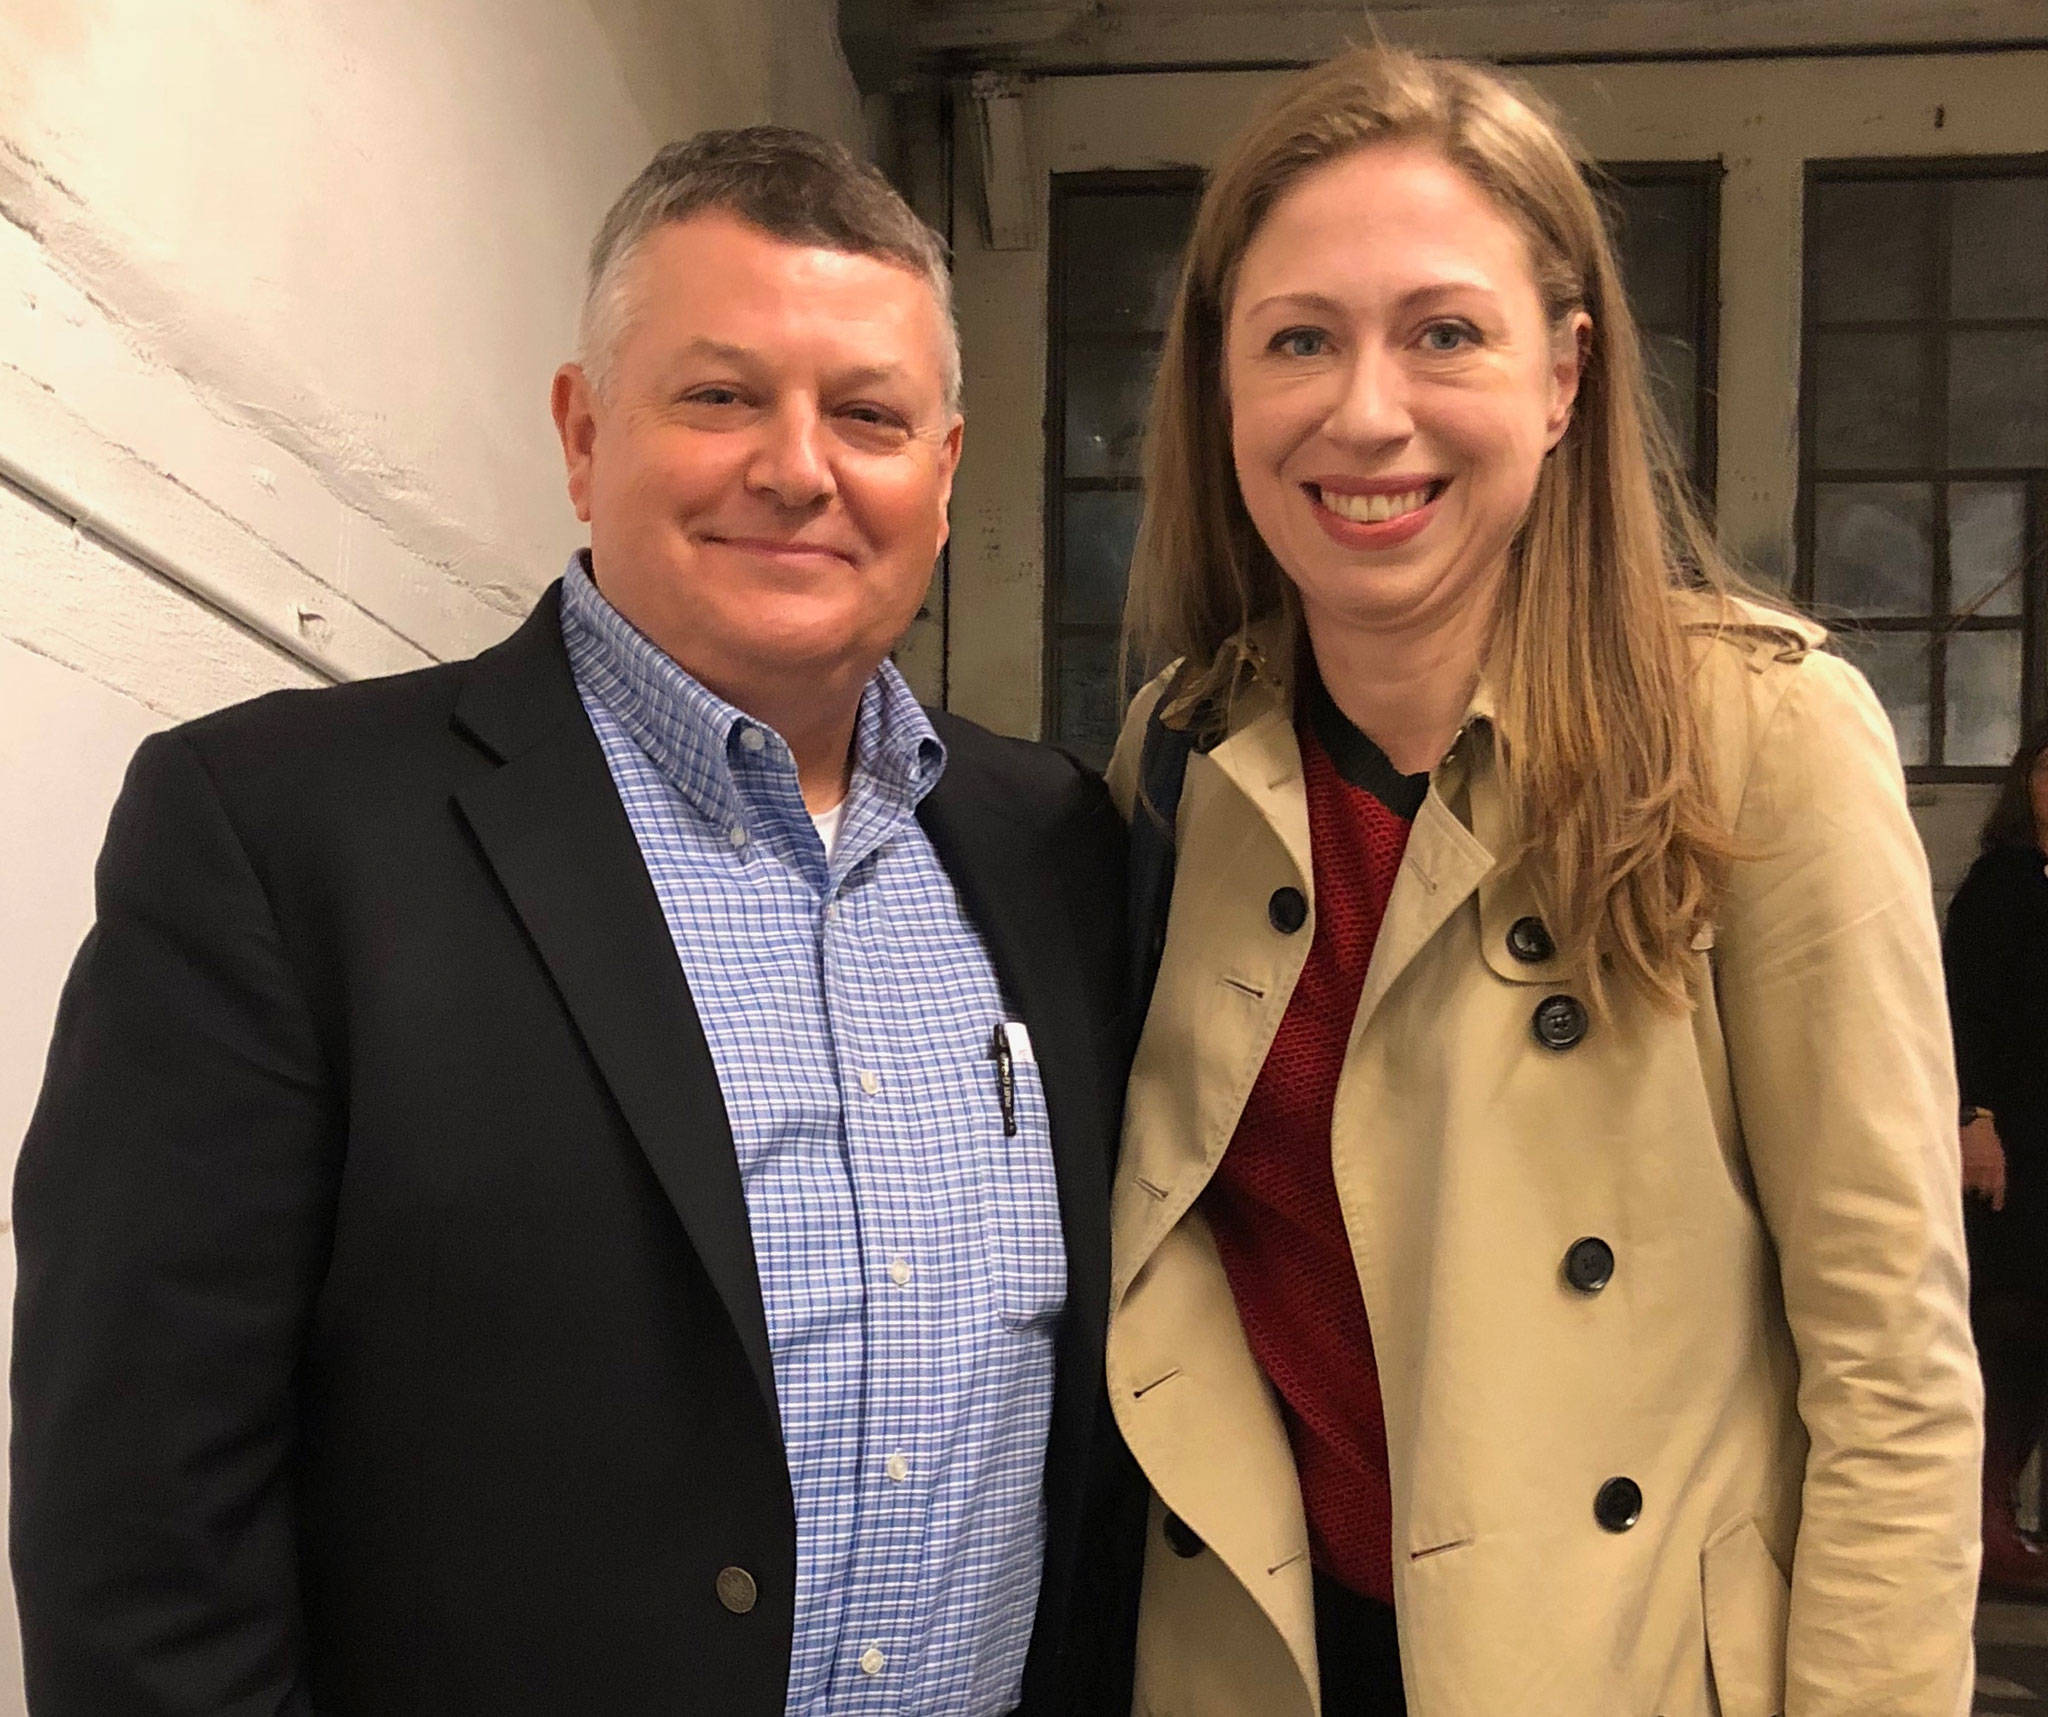 Joe D’Amico, Security Services Northwest Inc. president, left, stands with Chelsea Clinton on Oct. 24 after she attended a book signing event in Seattle. Security Services was contracted to provide a security detail for Clinton’s book signing event. Submitted photo